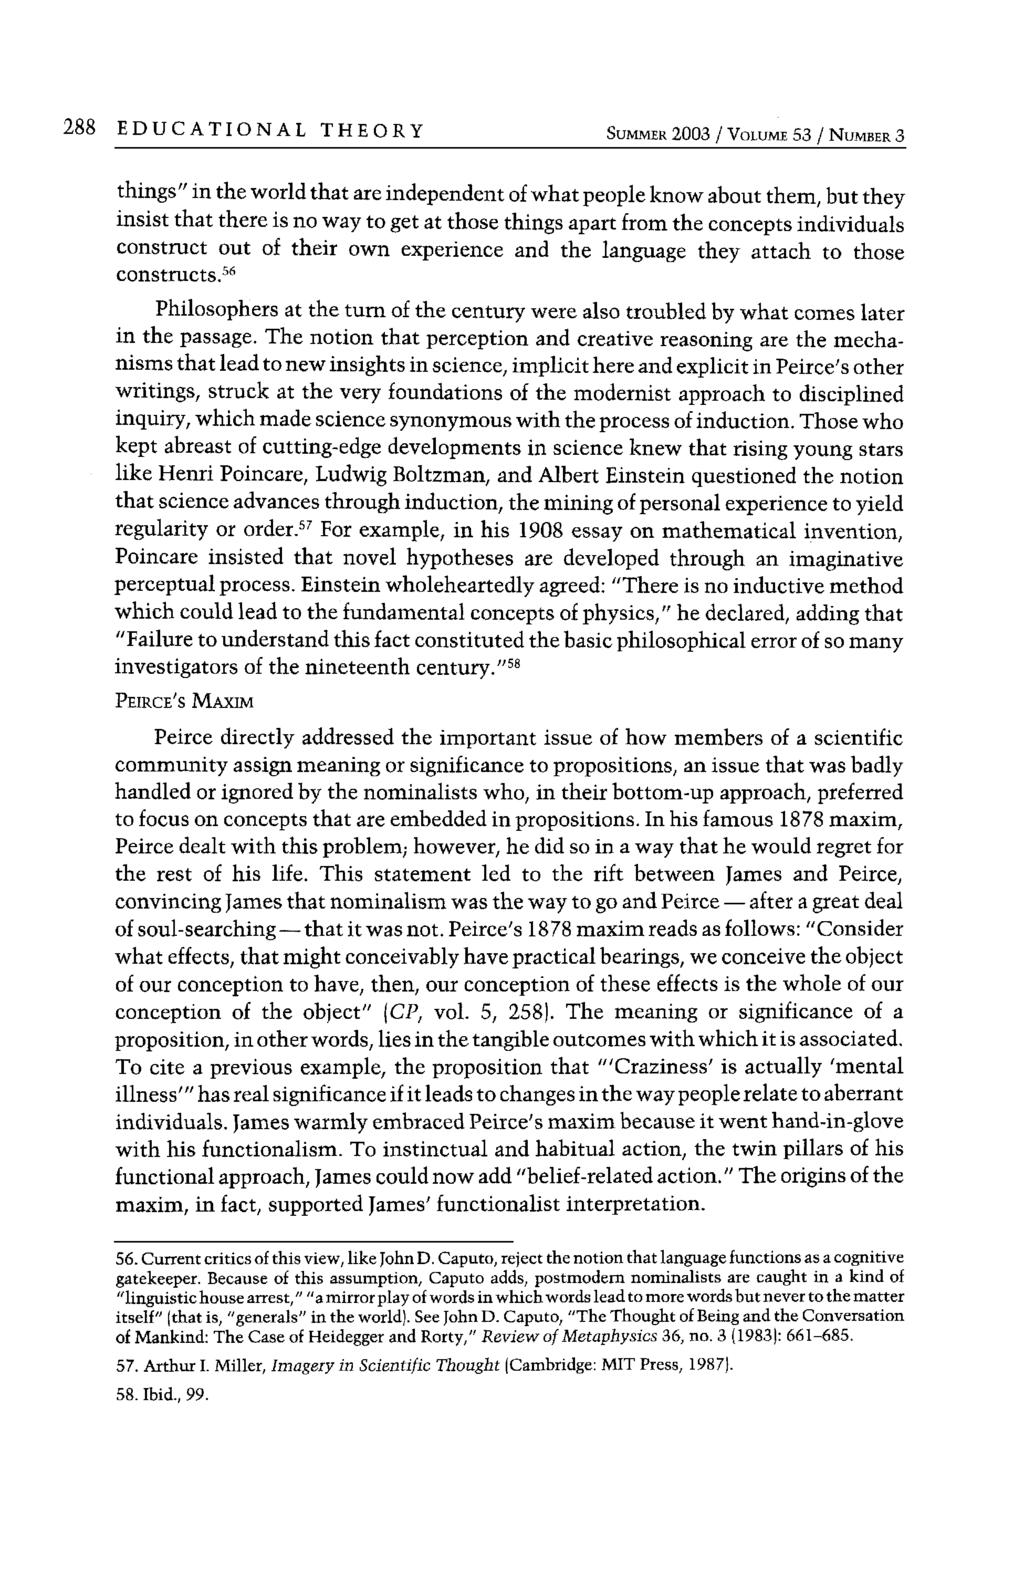 288 EDUCATIONAL THEORY SUMMER 2003 / VOLUME 53 / NUMBER 3 things in the world that are independent of what people know about them, but they insist that there is no way to get at those things apart